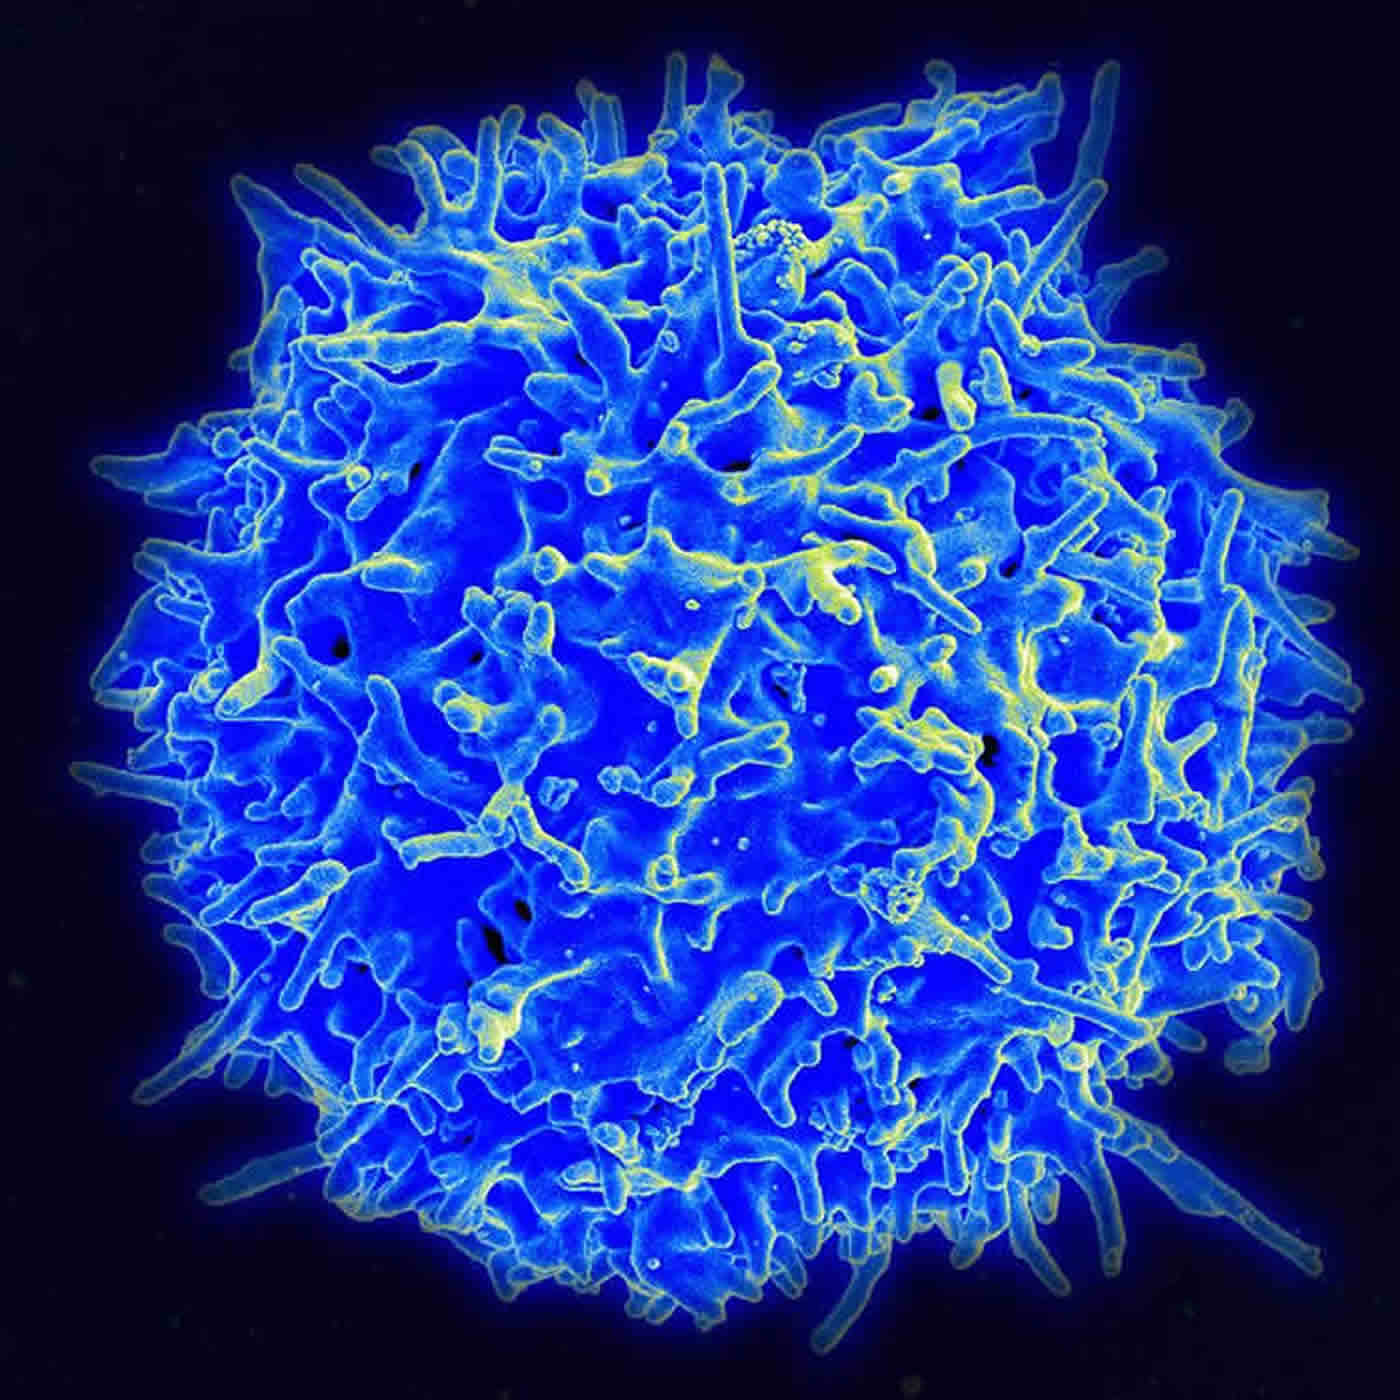  Image shows a T cell.